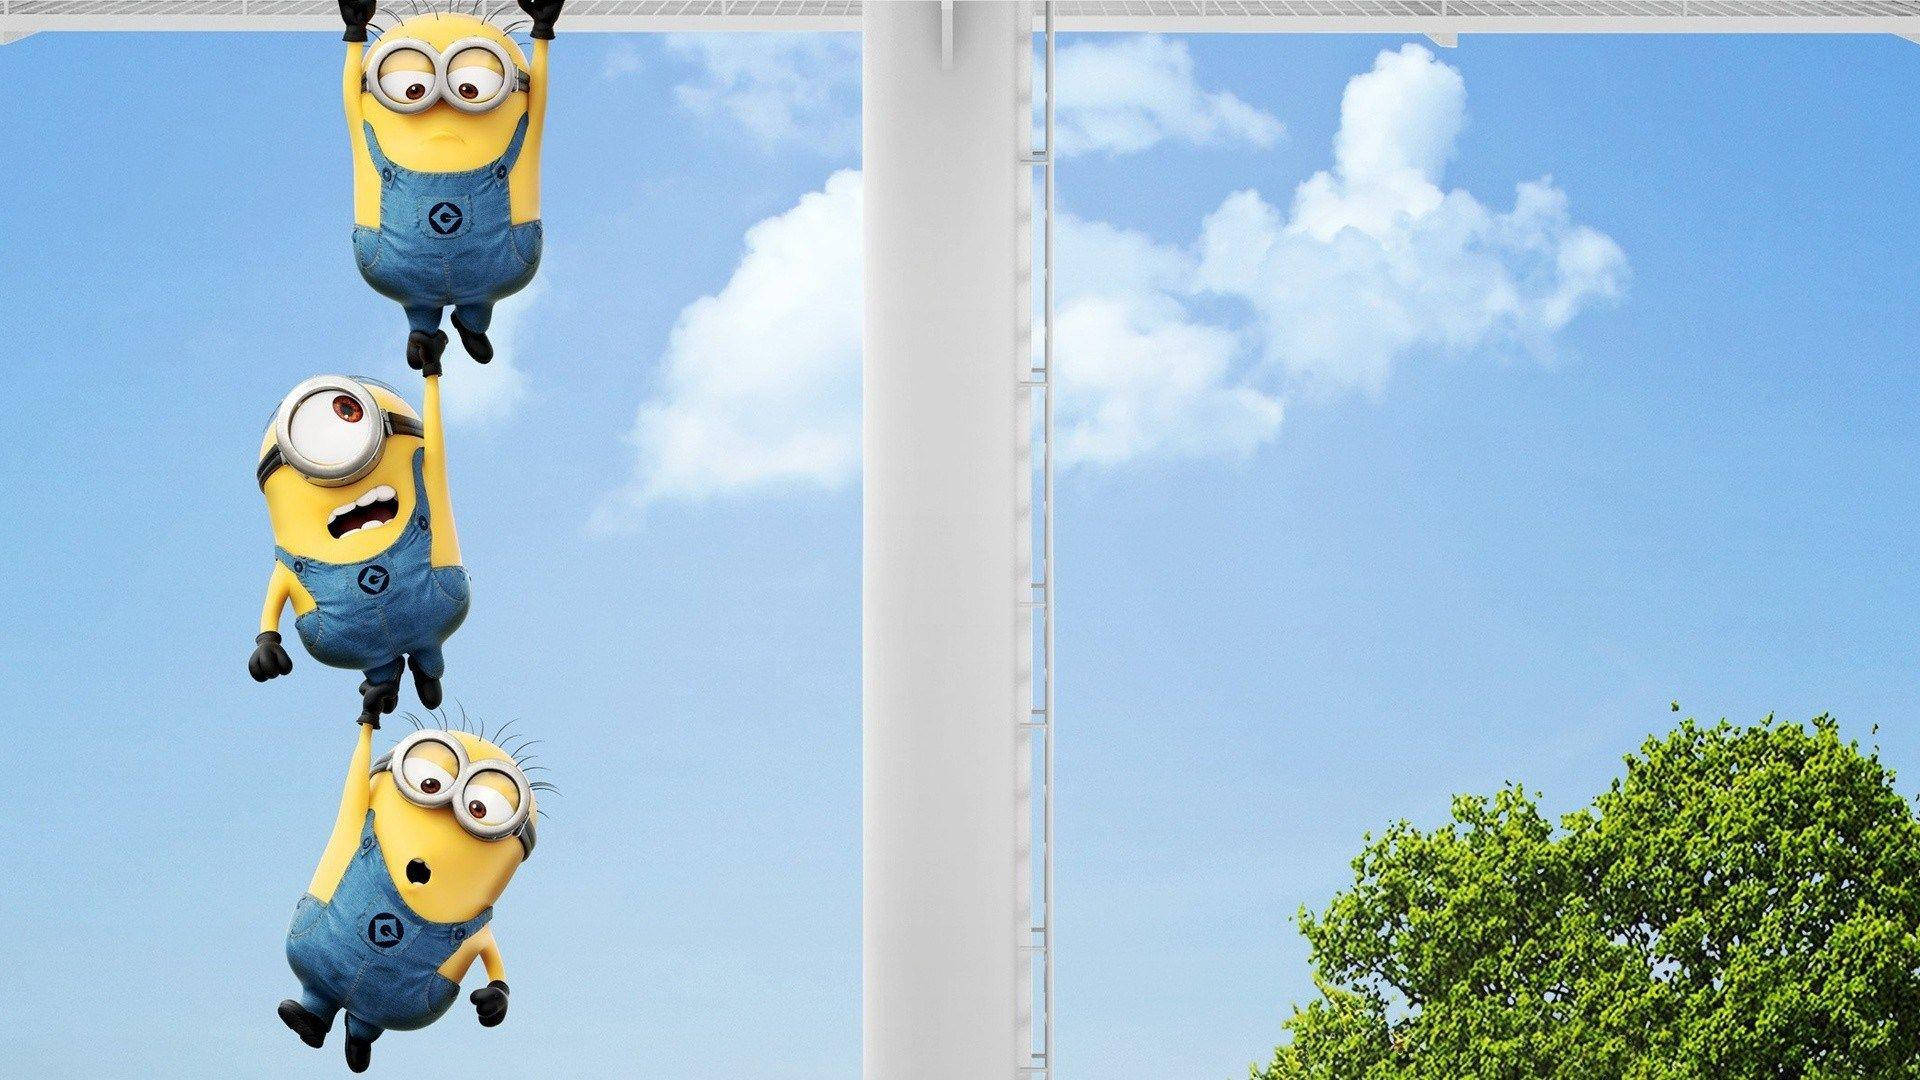 Minions 1920X1080 Wallpaper and Background Image